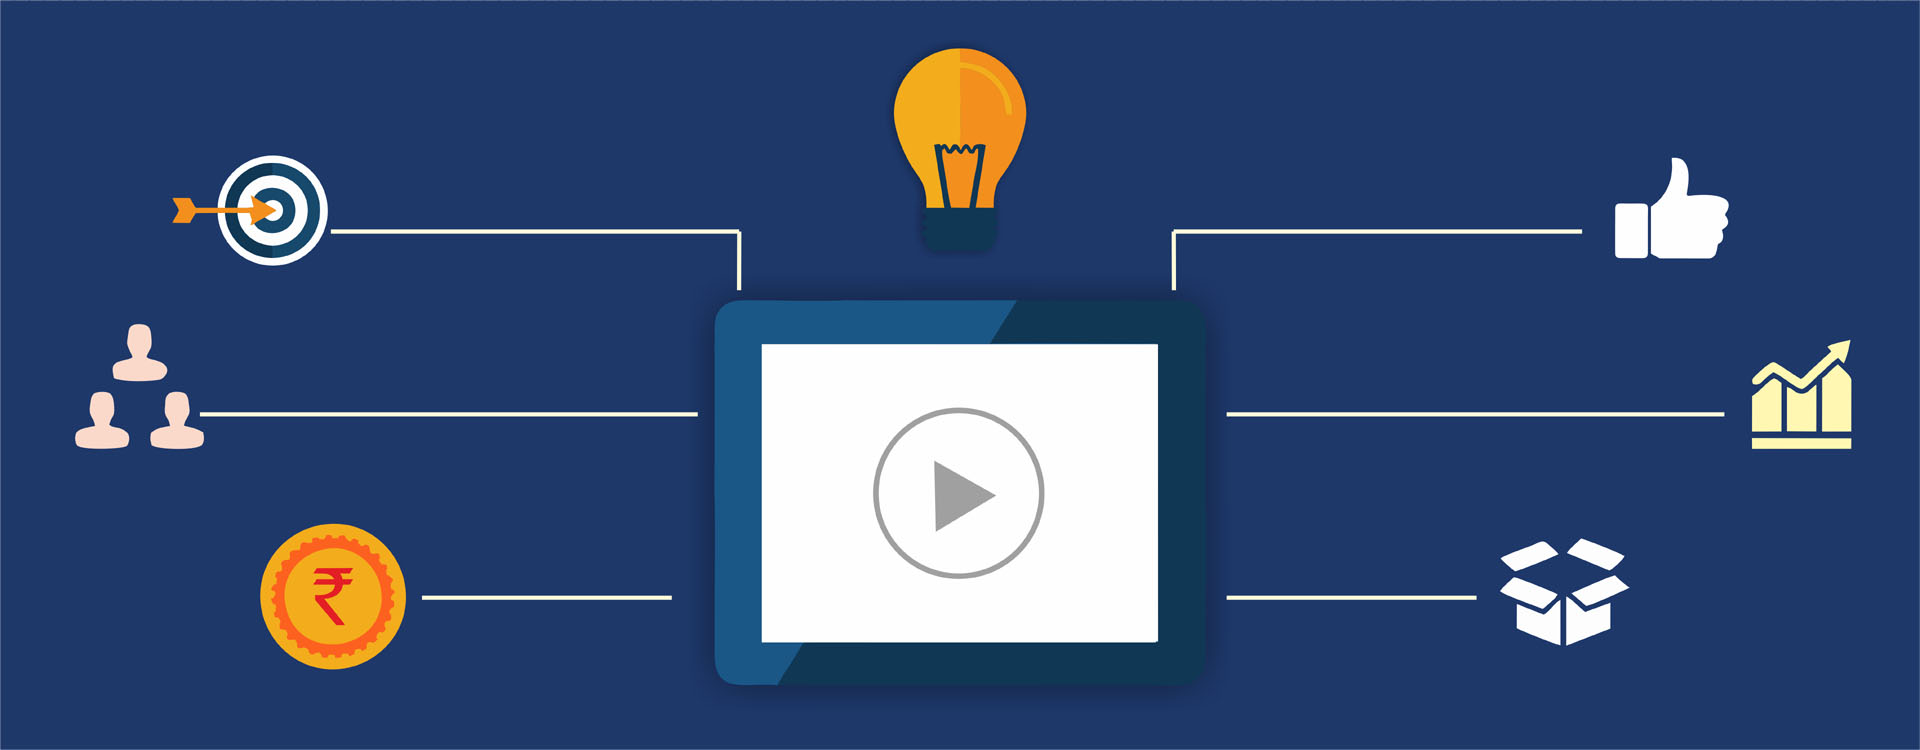 Reach Your Target Audience With A Better Video Marketing Strategy